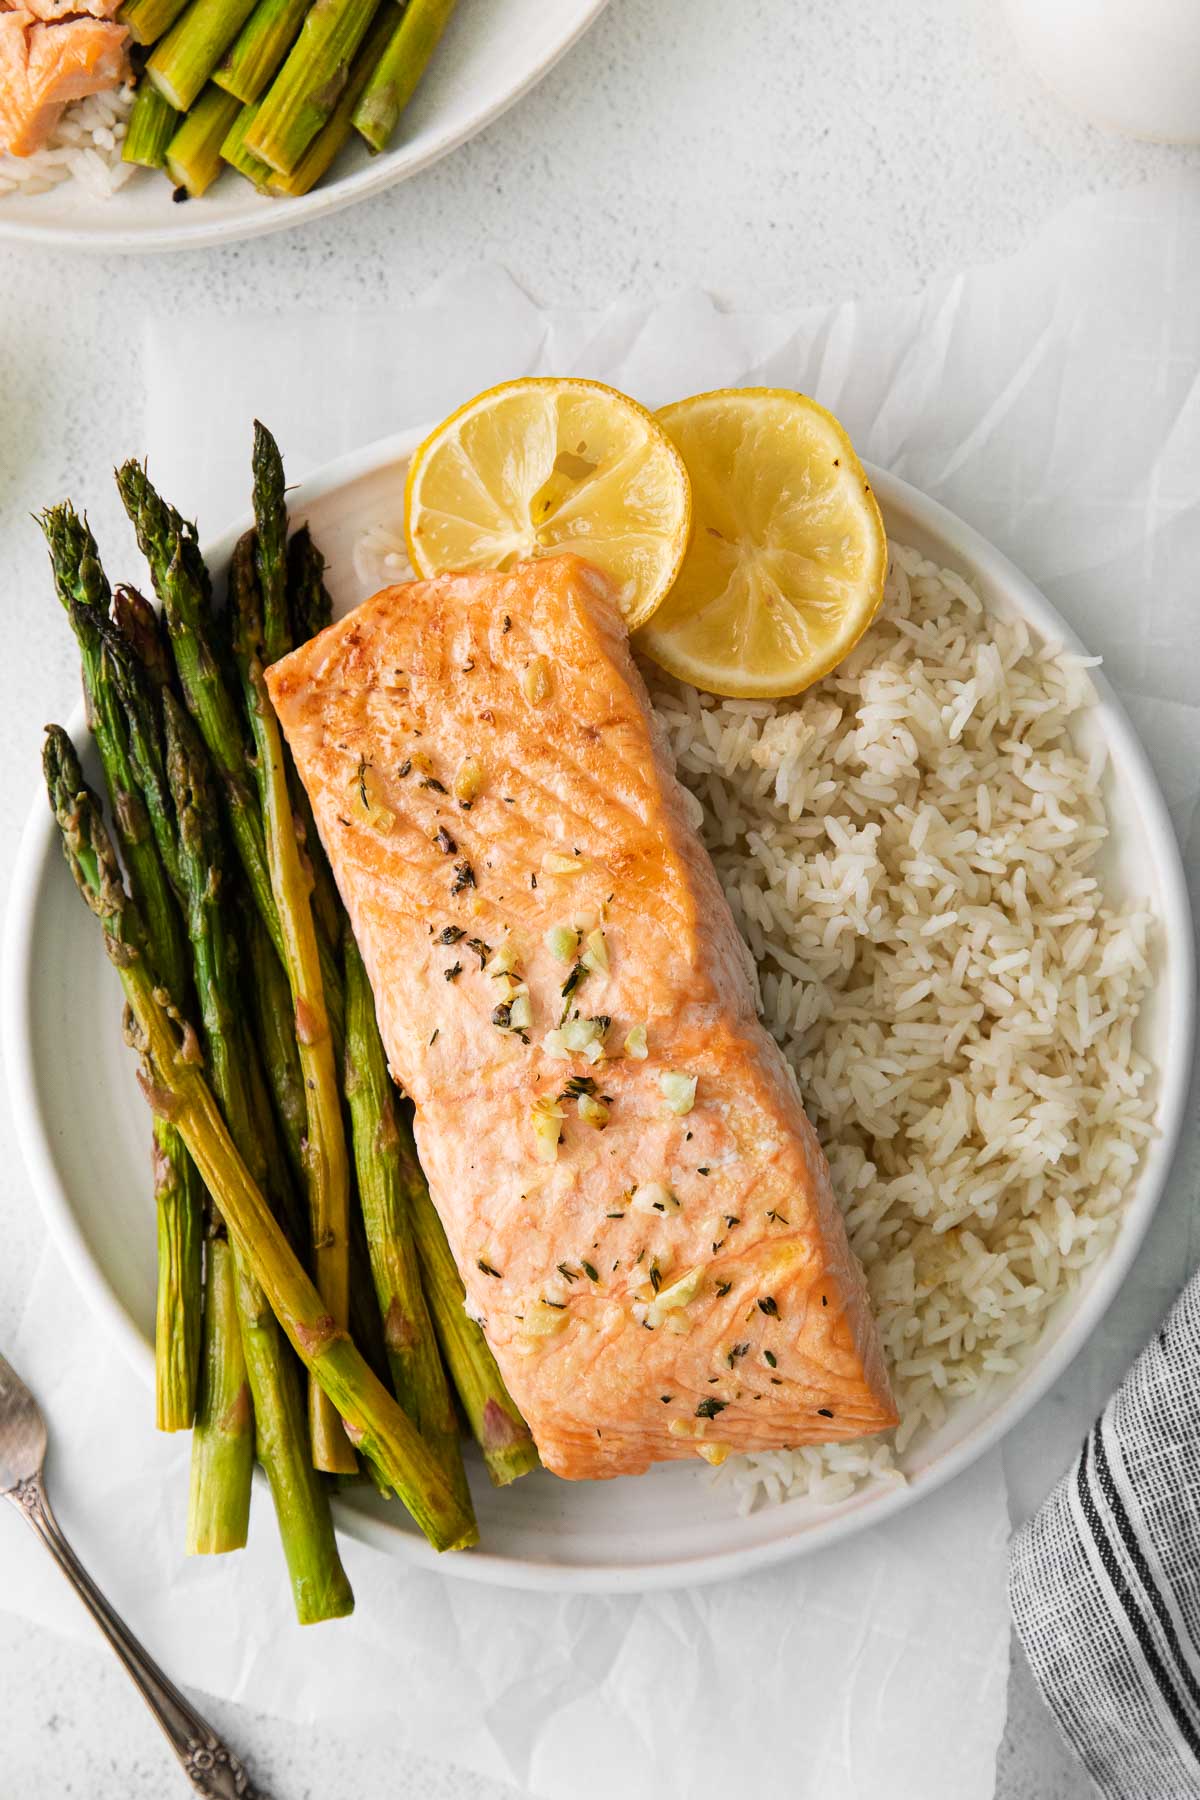 white plate with a baked salmon fillet, white rice and baked asparagus spears